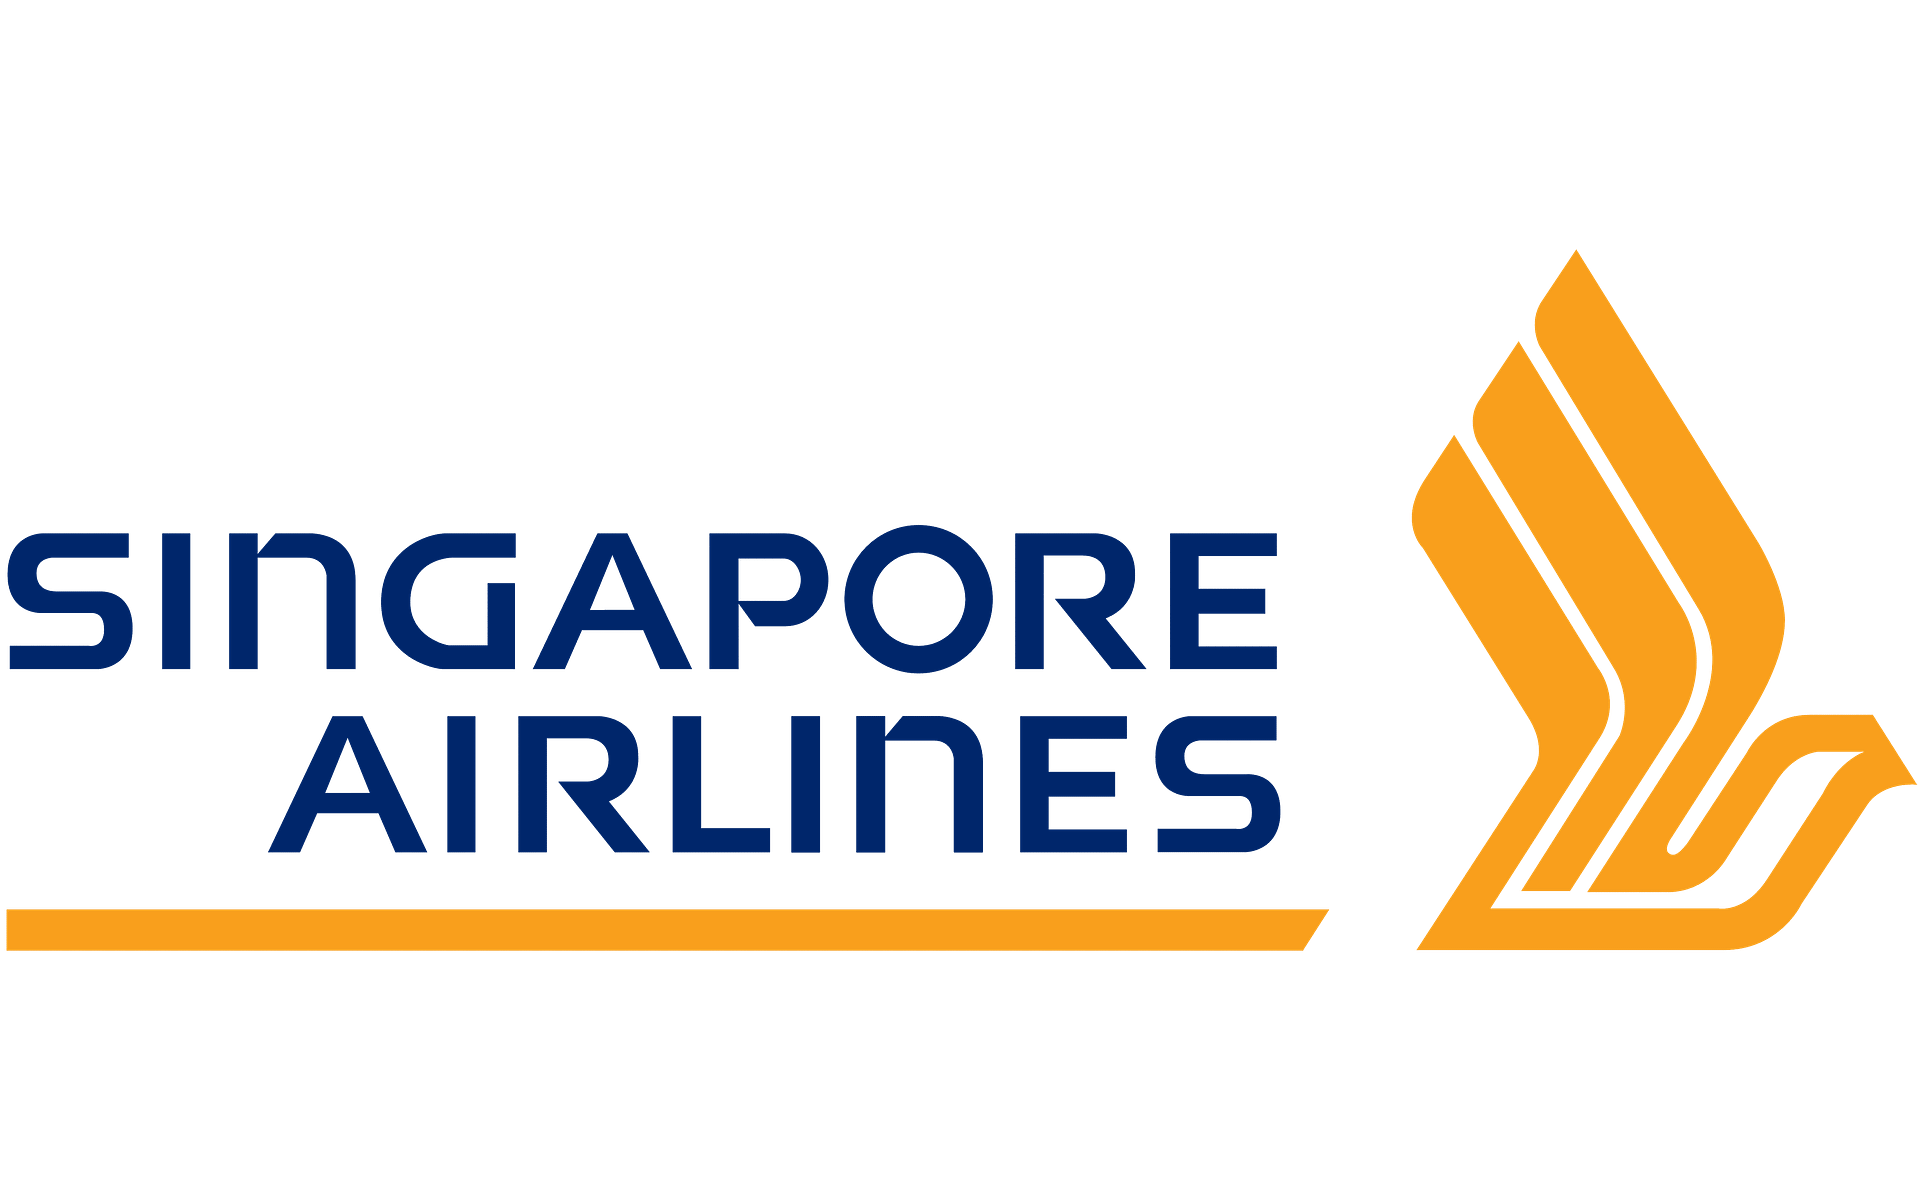 Singapore Airlines | Phone Number 1-800-742-3333